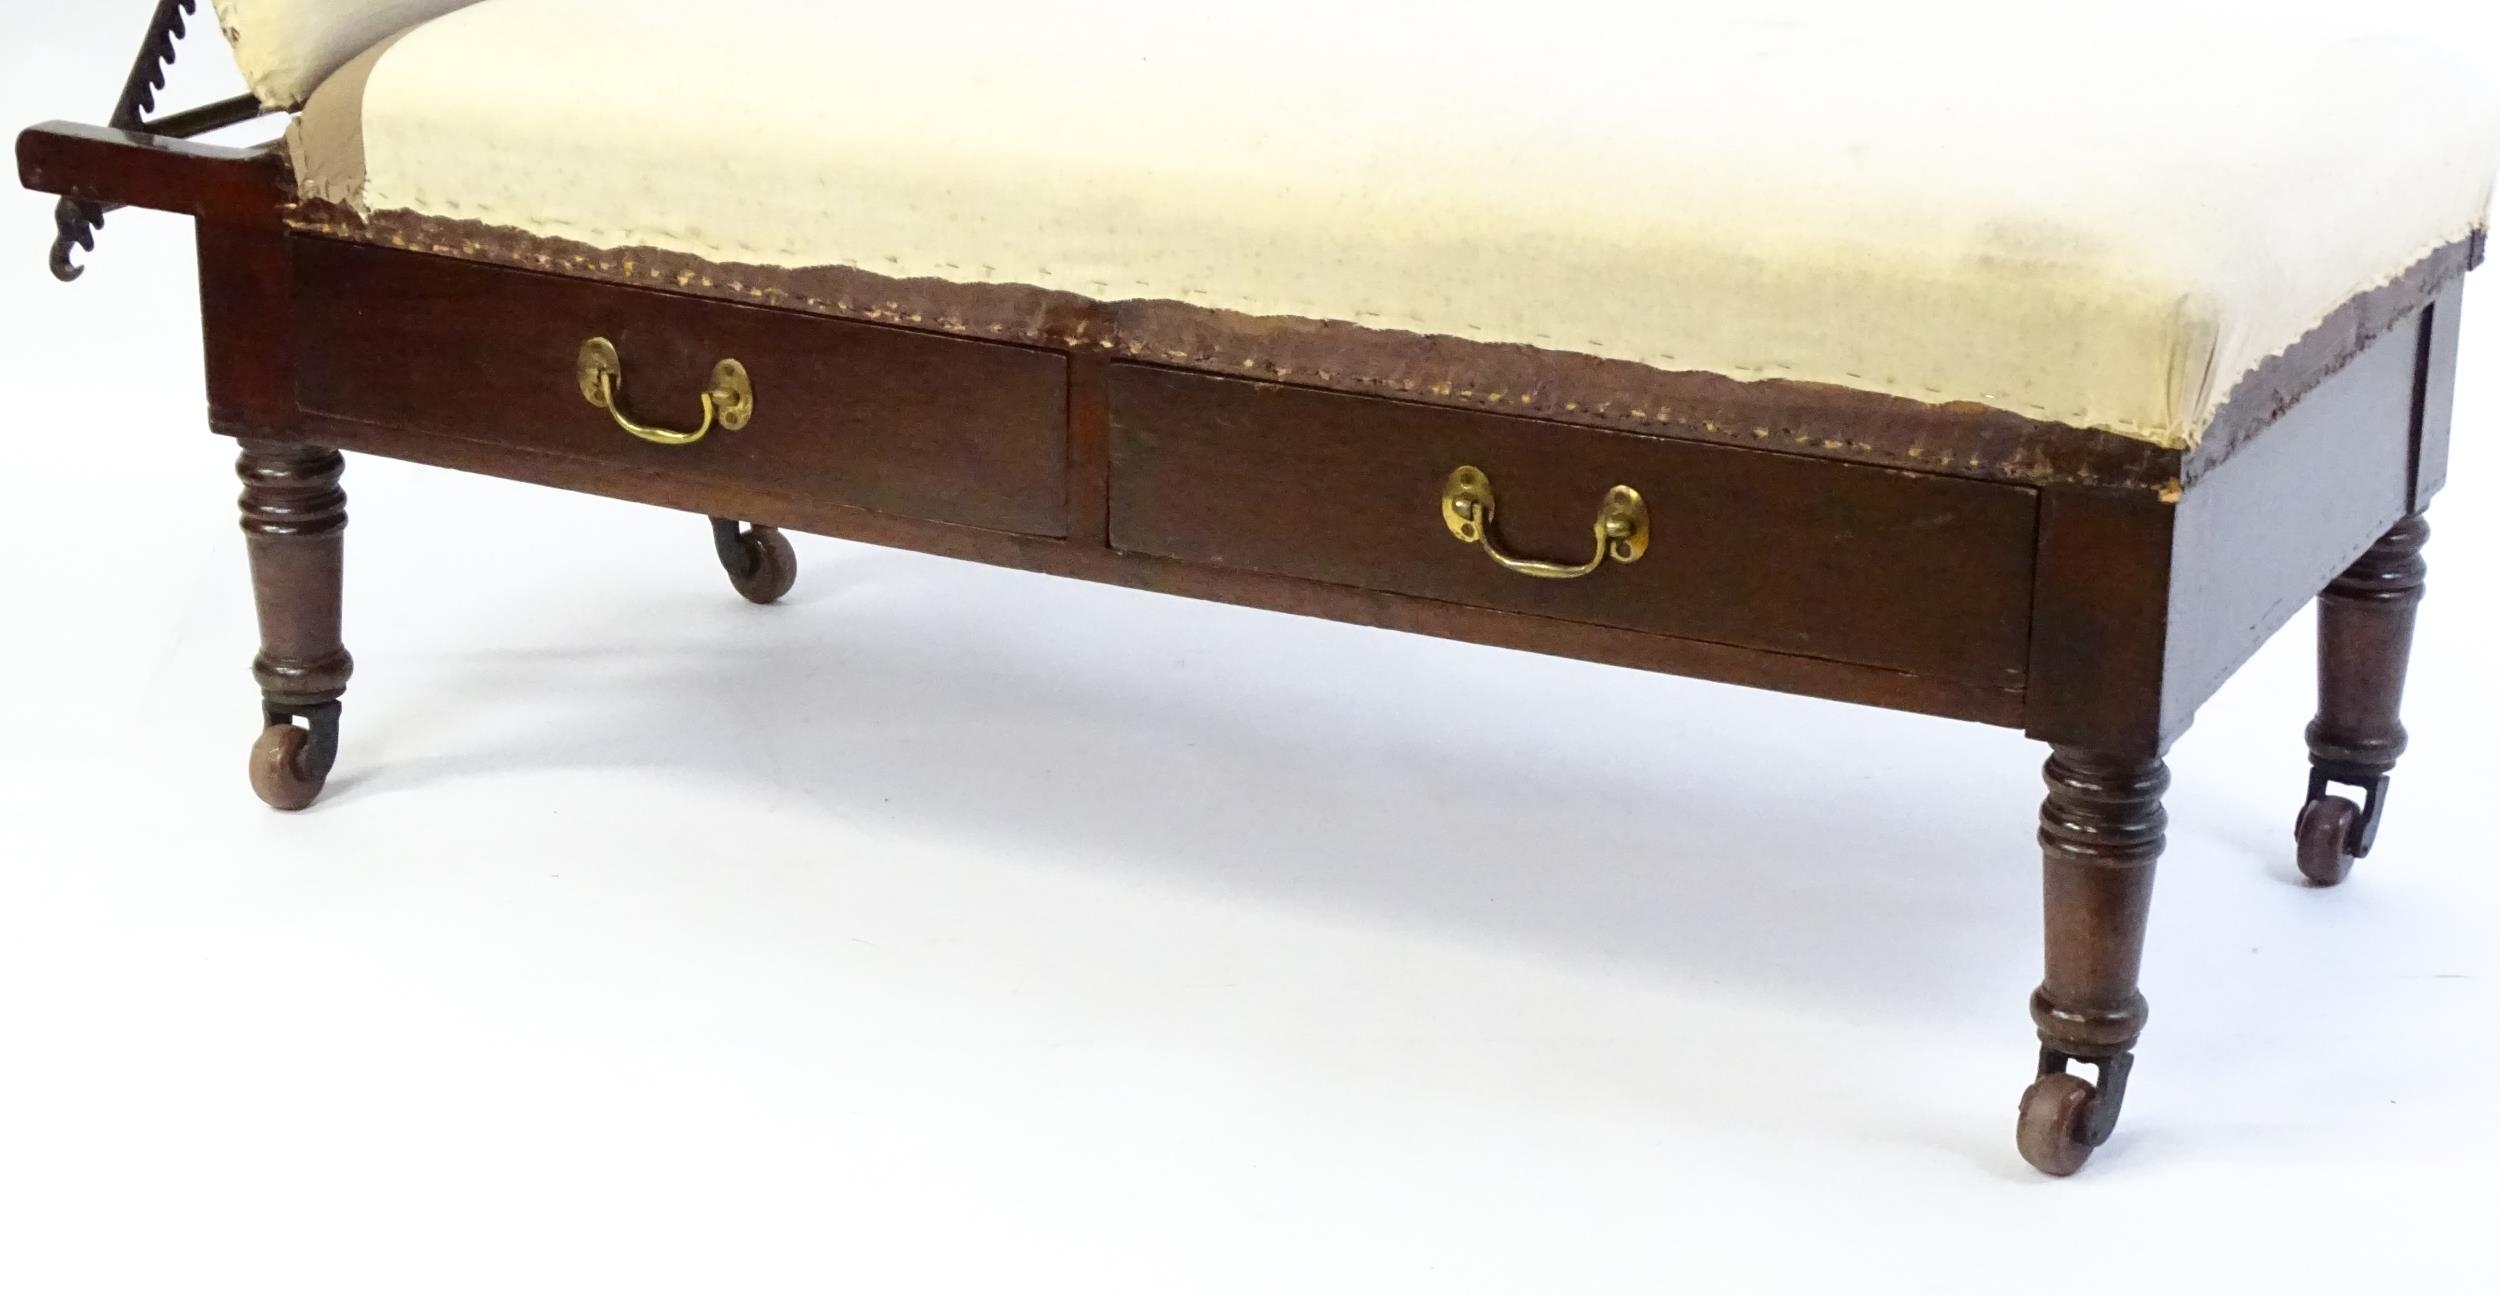 A Victorian 'Carters Literary Machine' day bed with an adjustable backrest above two short drawers - Image 4 of 10